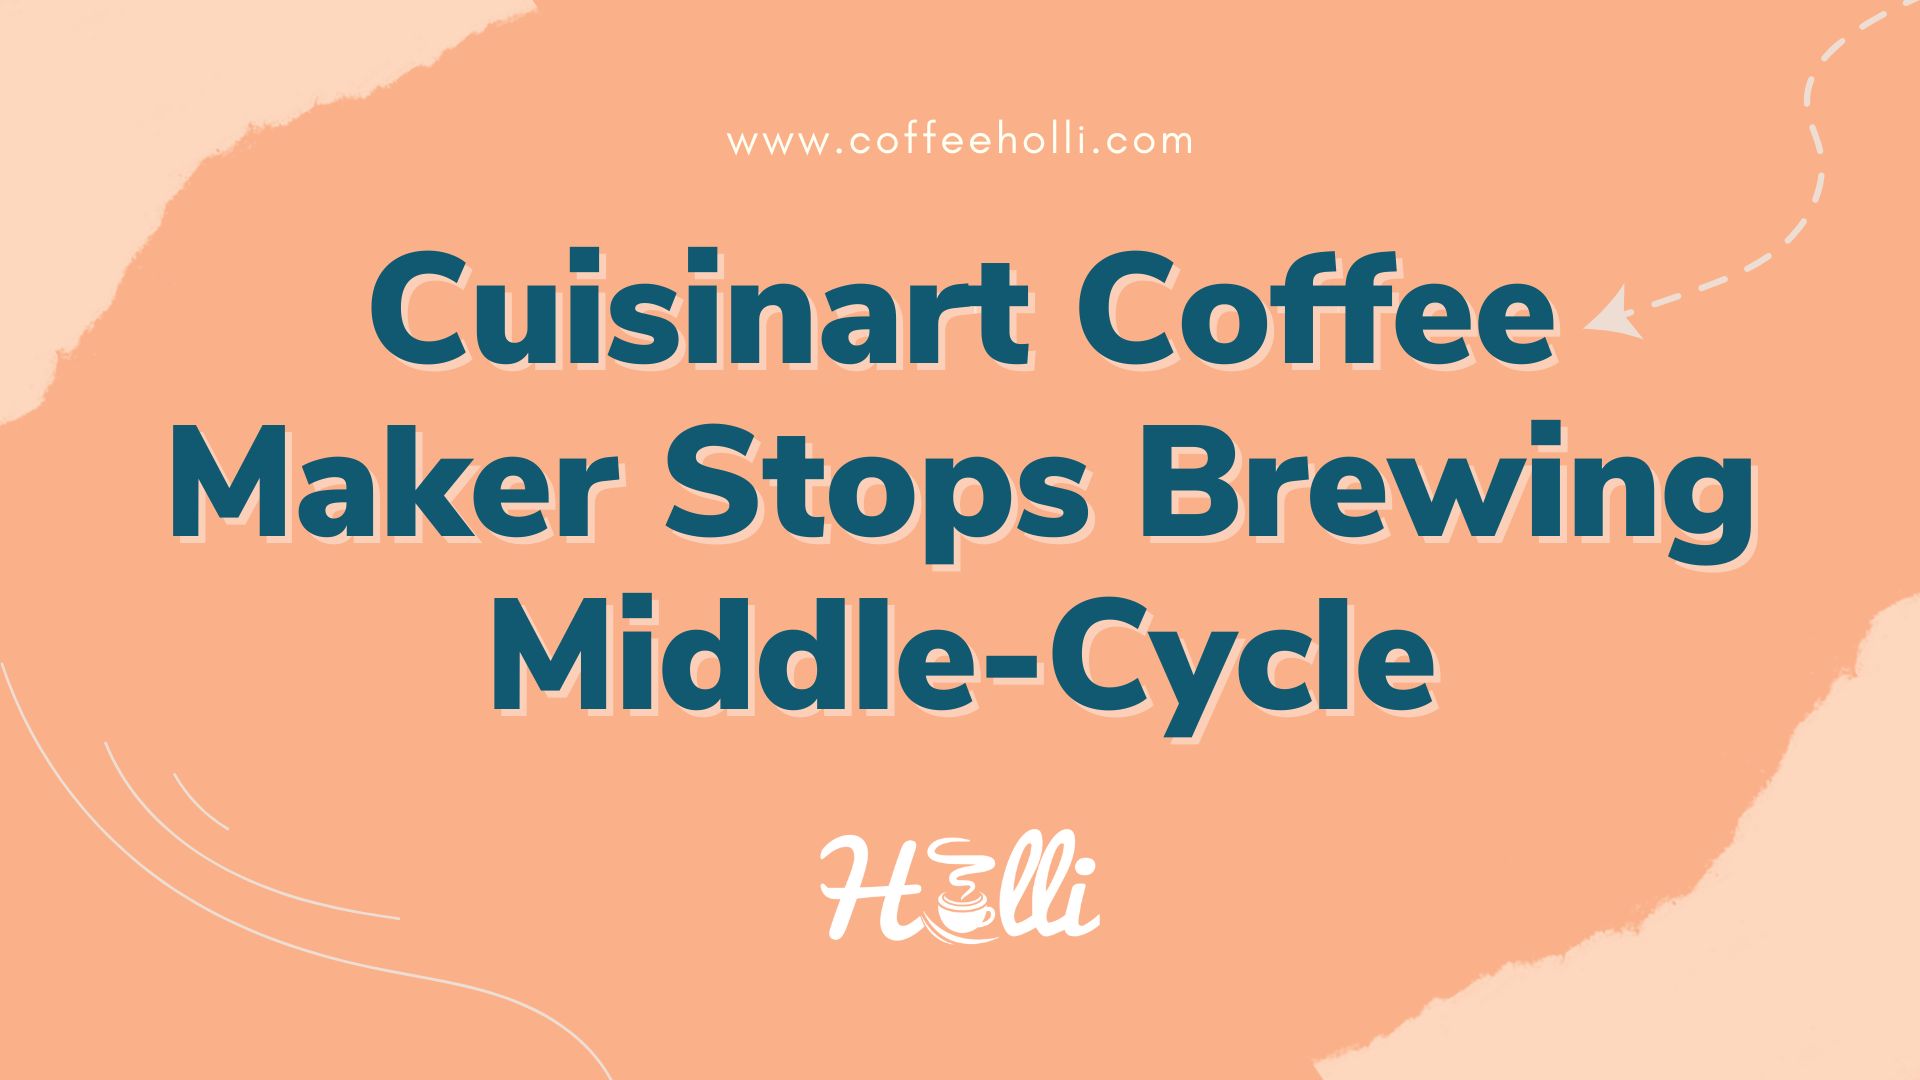 Cuisinart Coffee Maker Stops Brewing Middle-Cycle